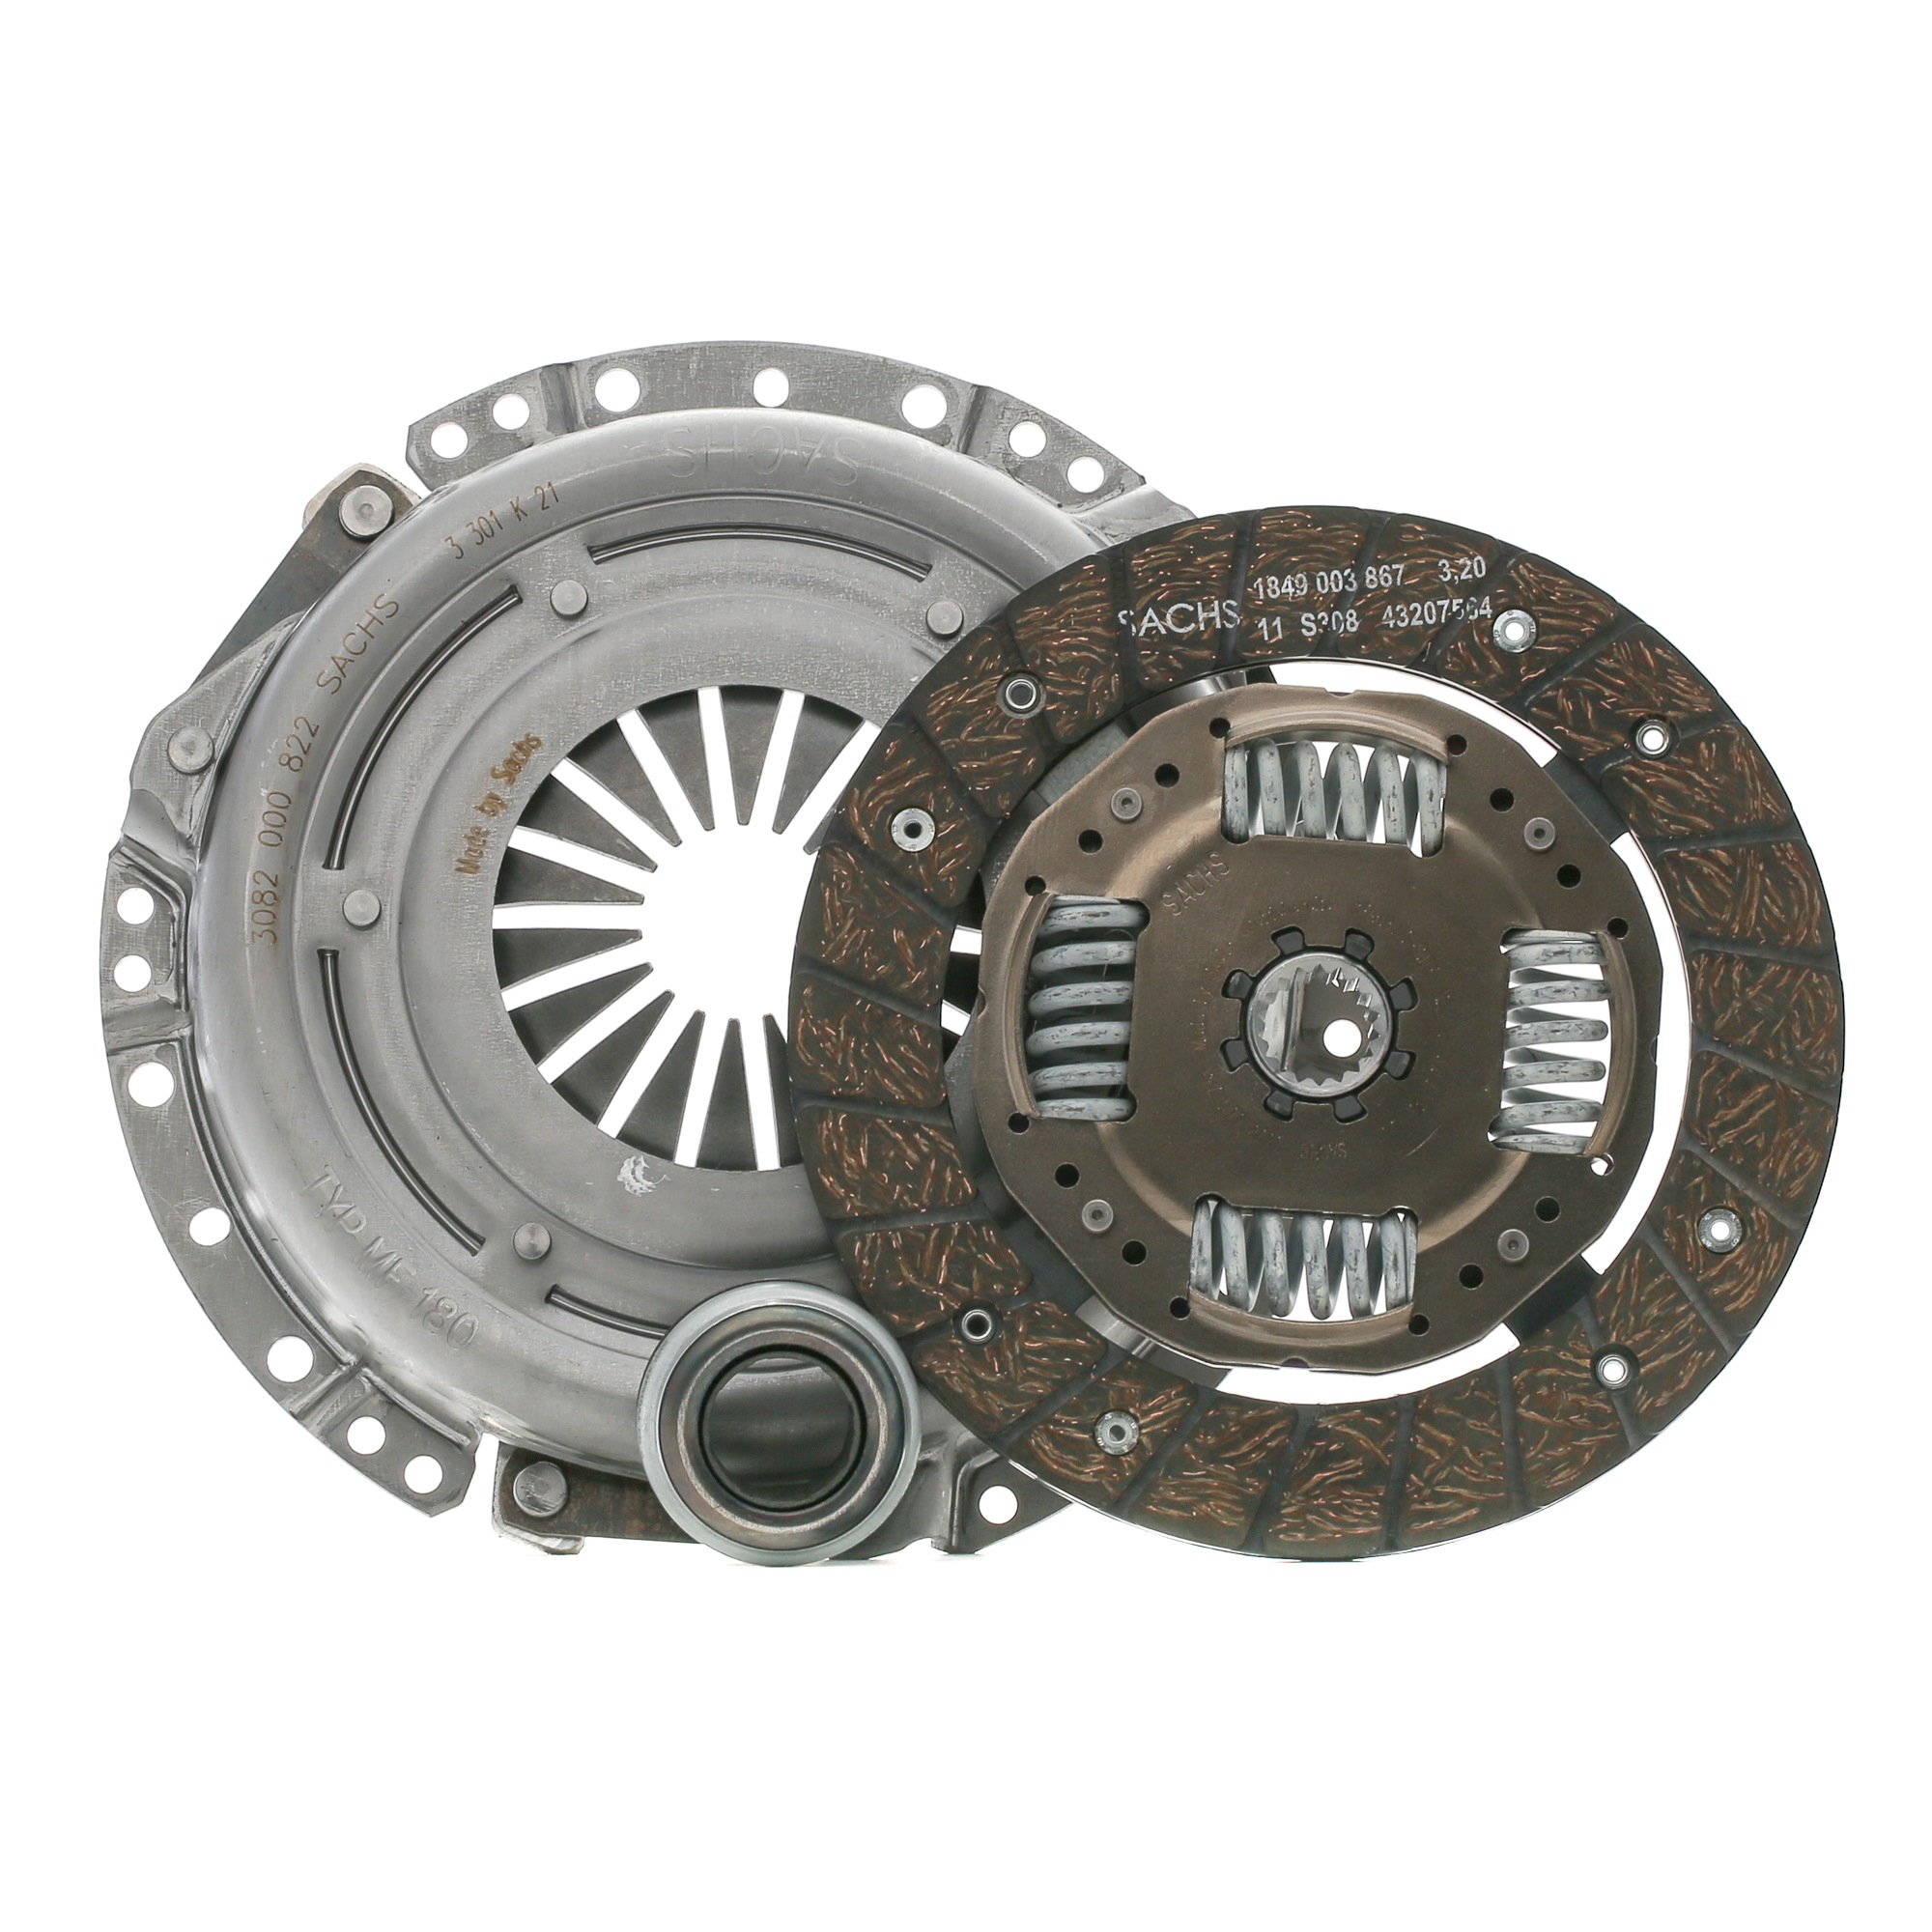 Original SACHS Clutch replacement kit 3000 950 017 for CITROЁN LNA